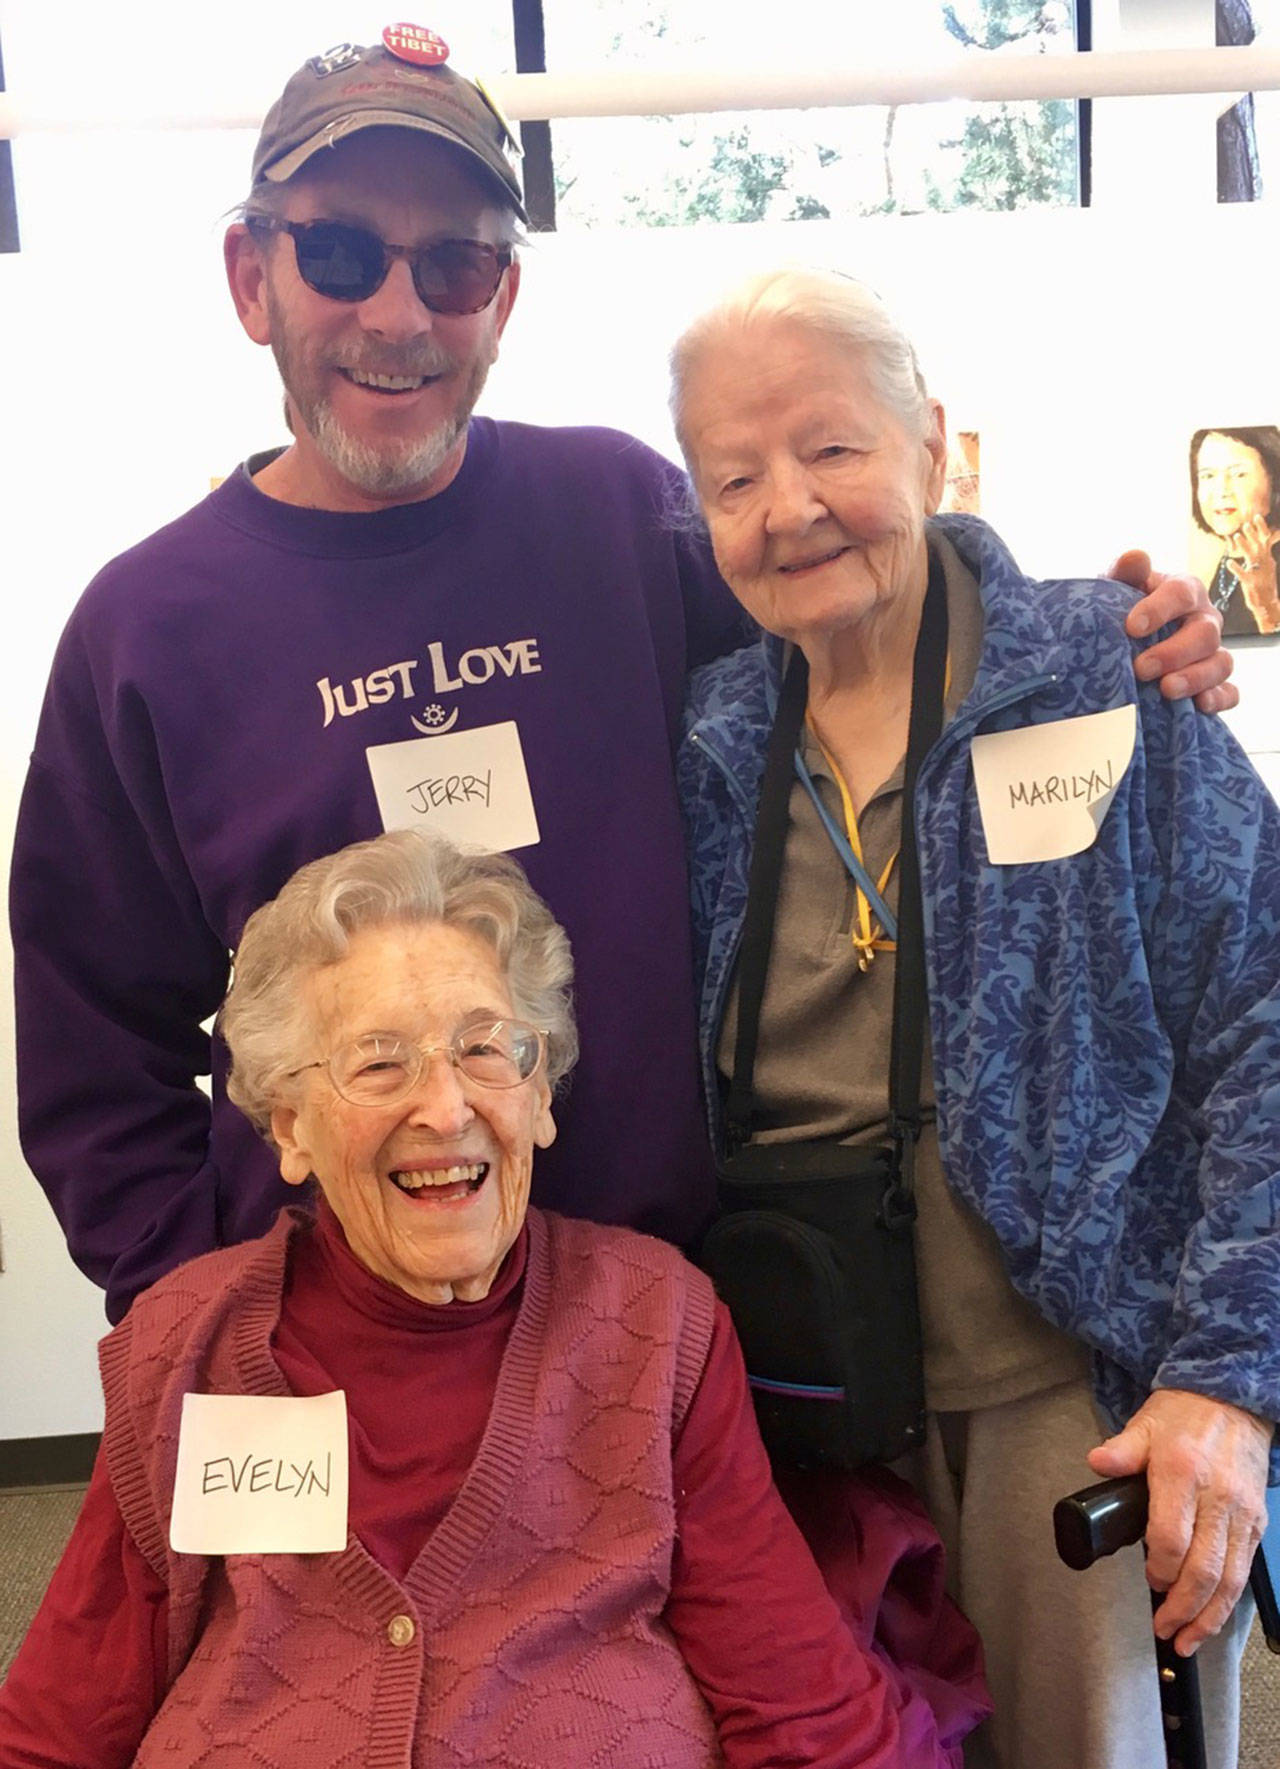 Bainbridge VIPs Evelyn Peratrovich, Jerry Brader and Marilyn Miller gather for a photo at a recent meeting. (Megan Hawgood photo)